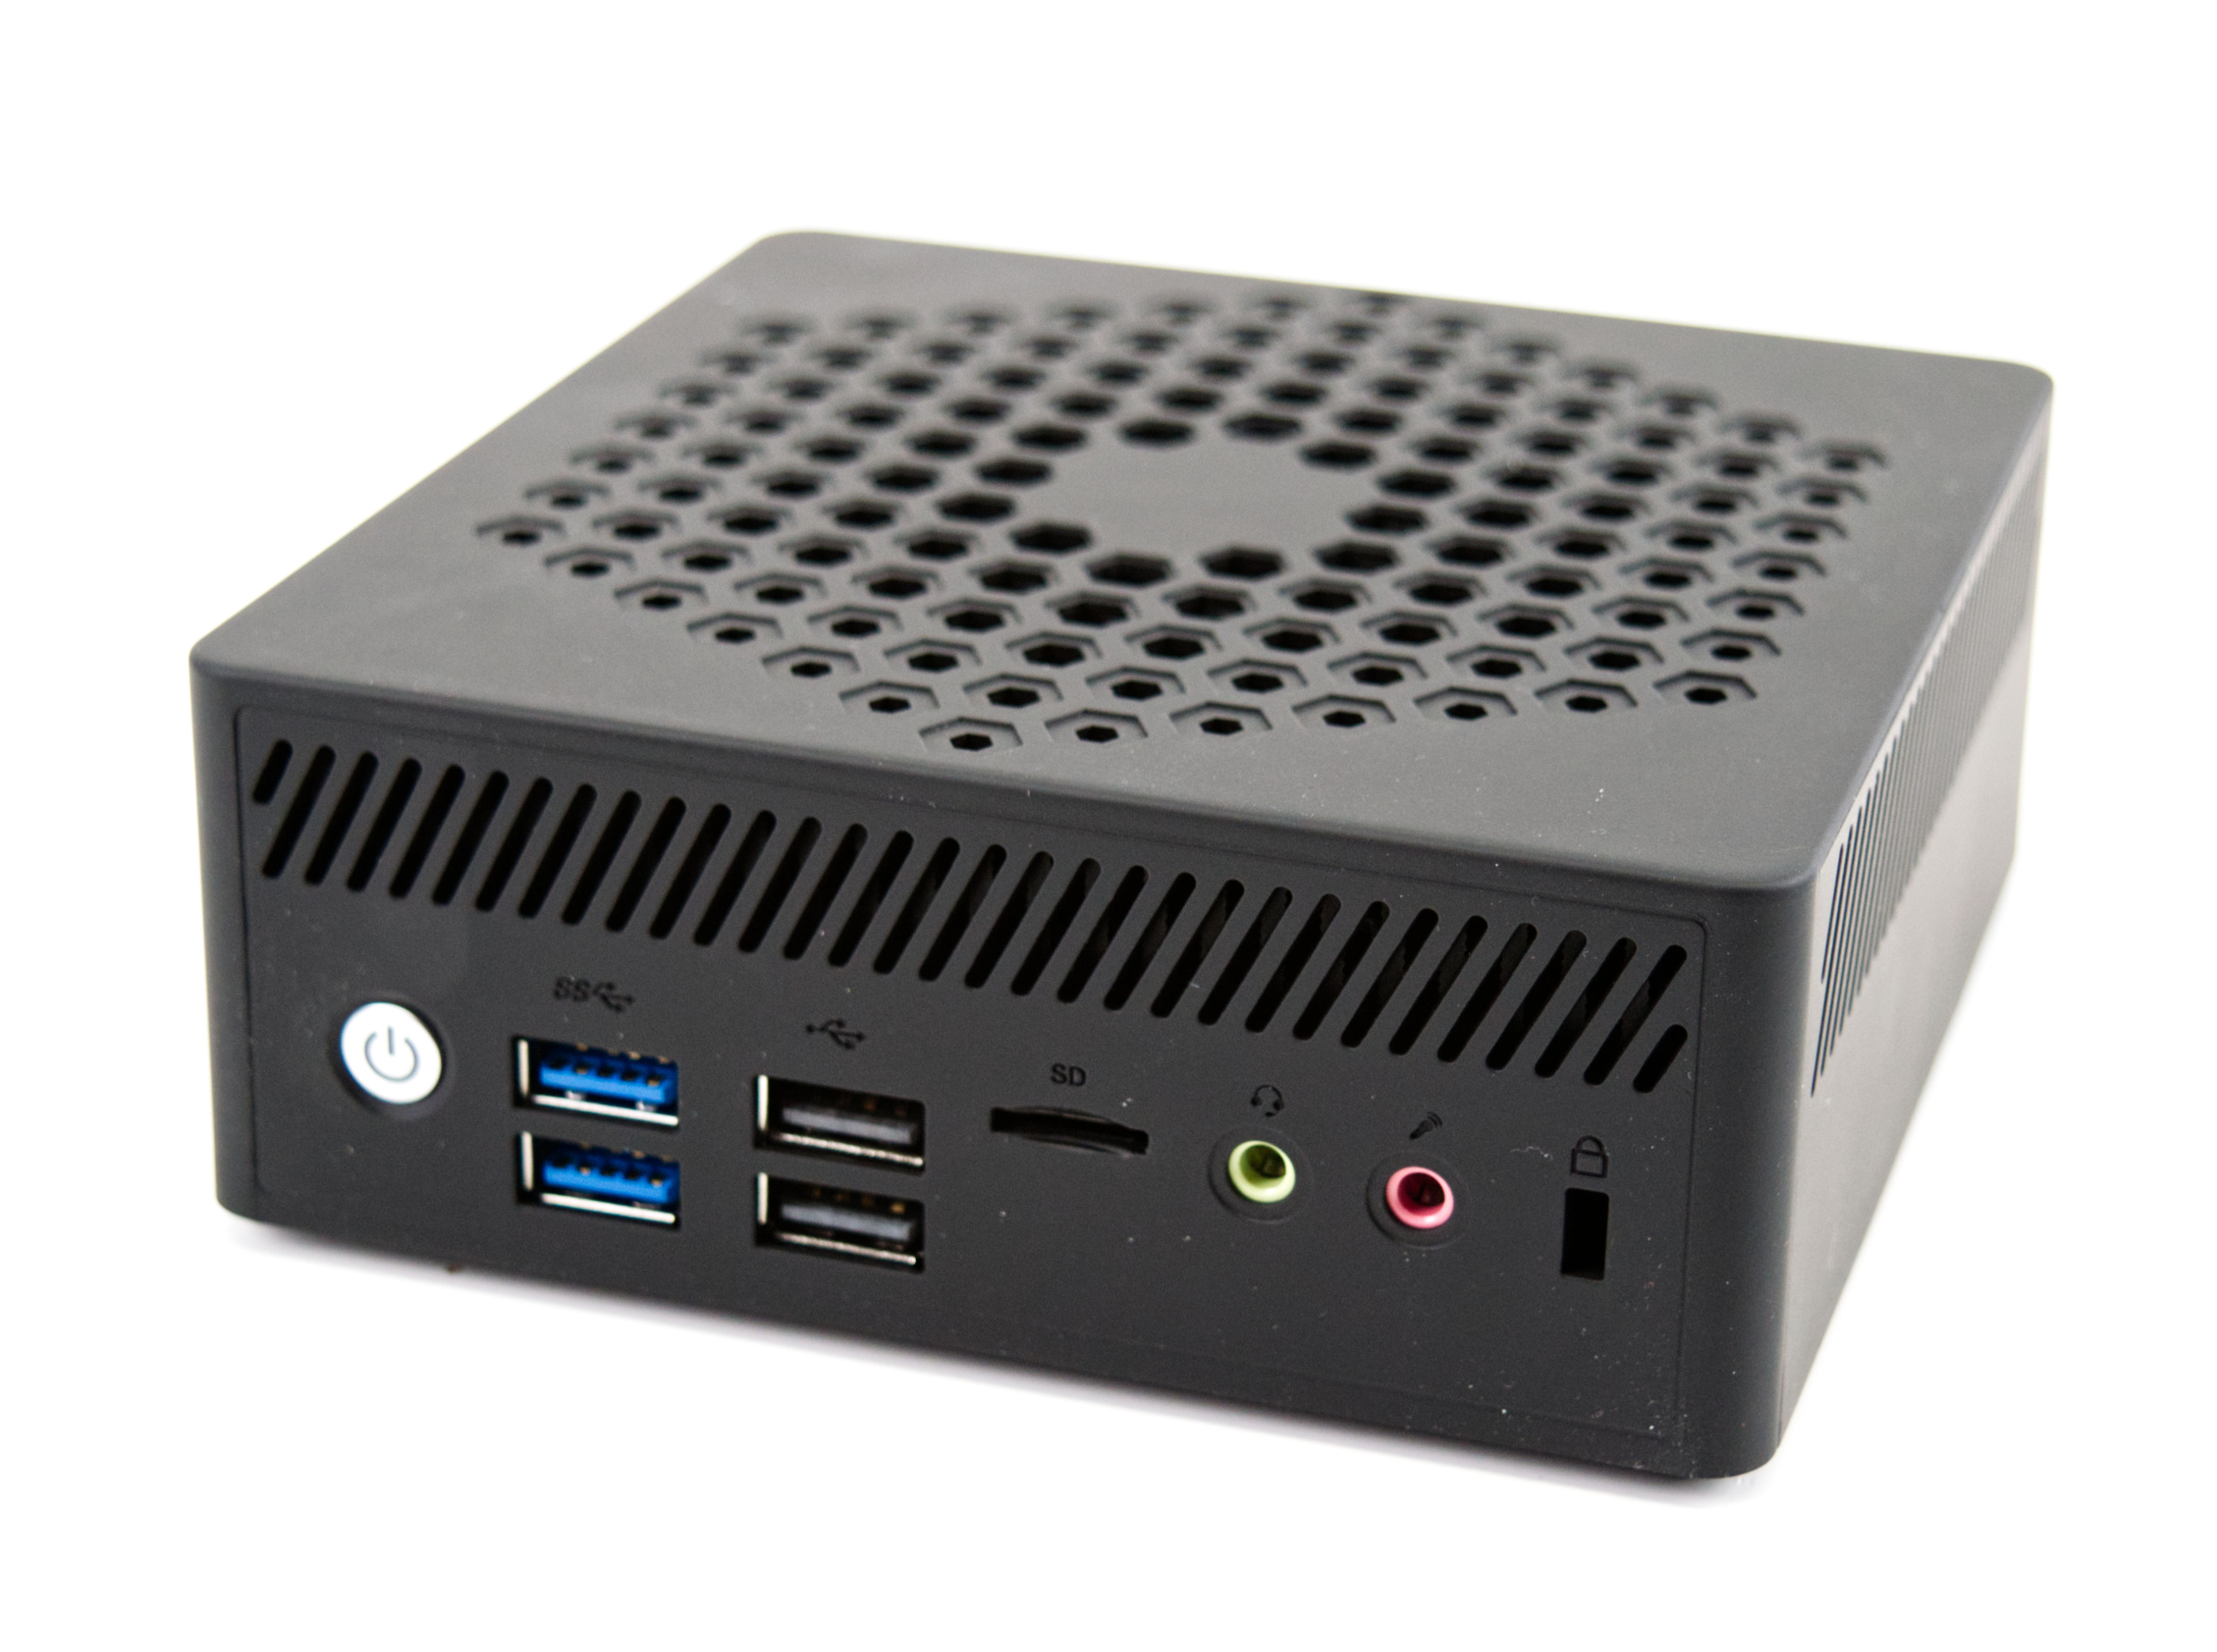 NiPoGi GK3 Plus N95 reviewed: A compact mini PC with an Intel N95 for  office use -  Reviews